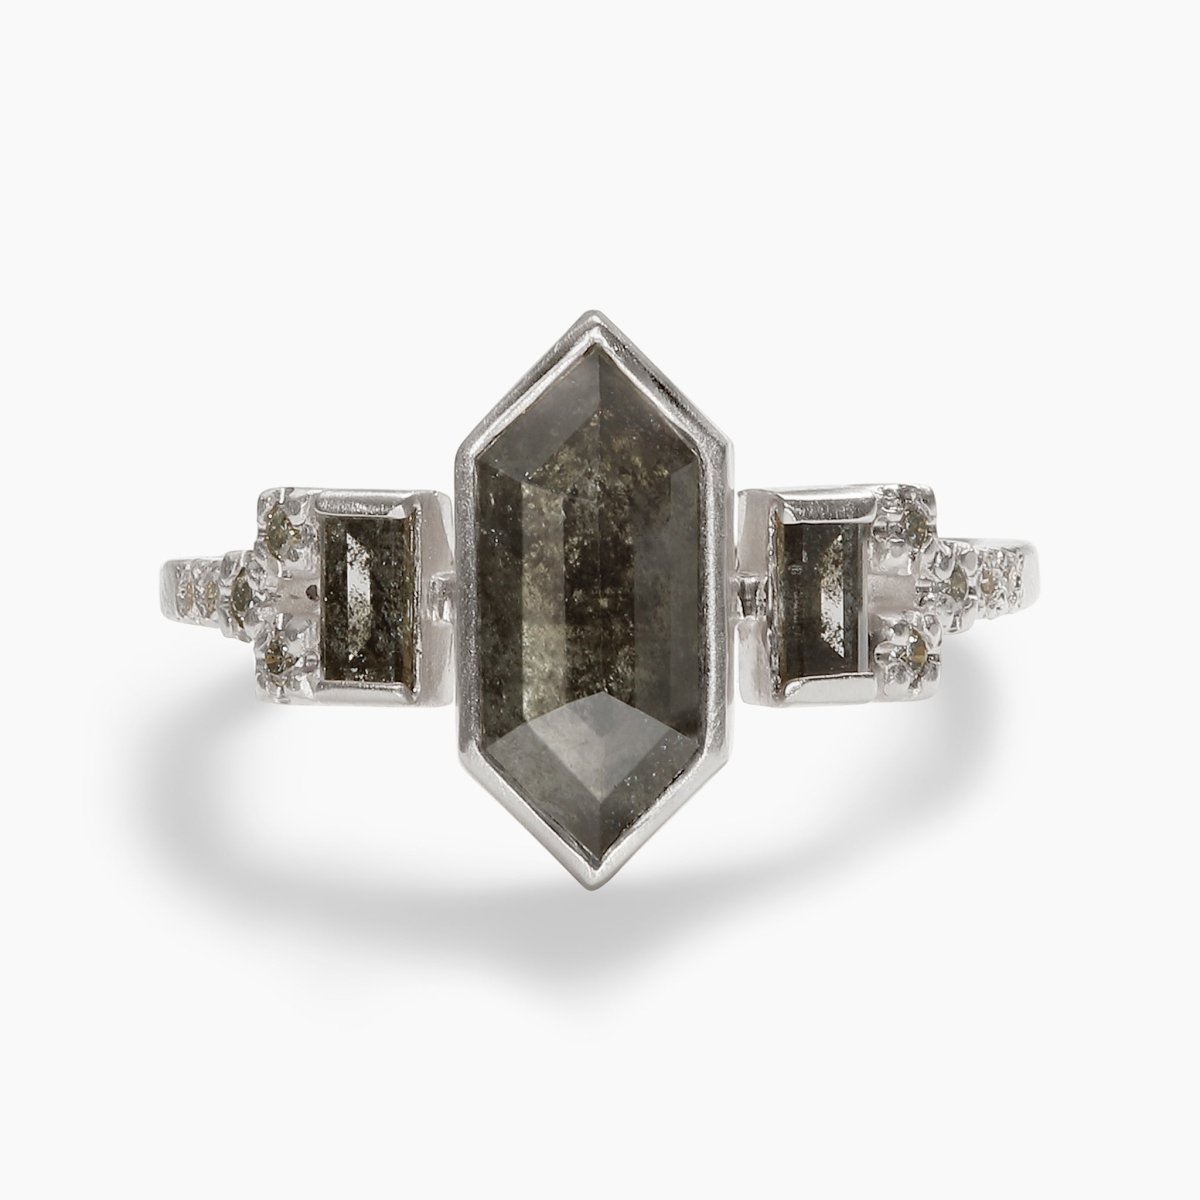 Ethical Engagement Rings: Conflict-Free, Lab-Grown Diamonds - Men's Journal